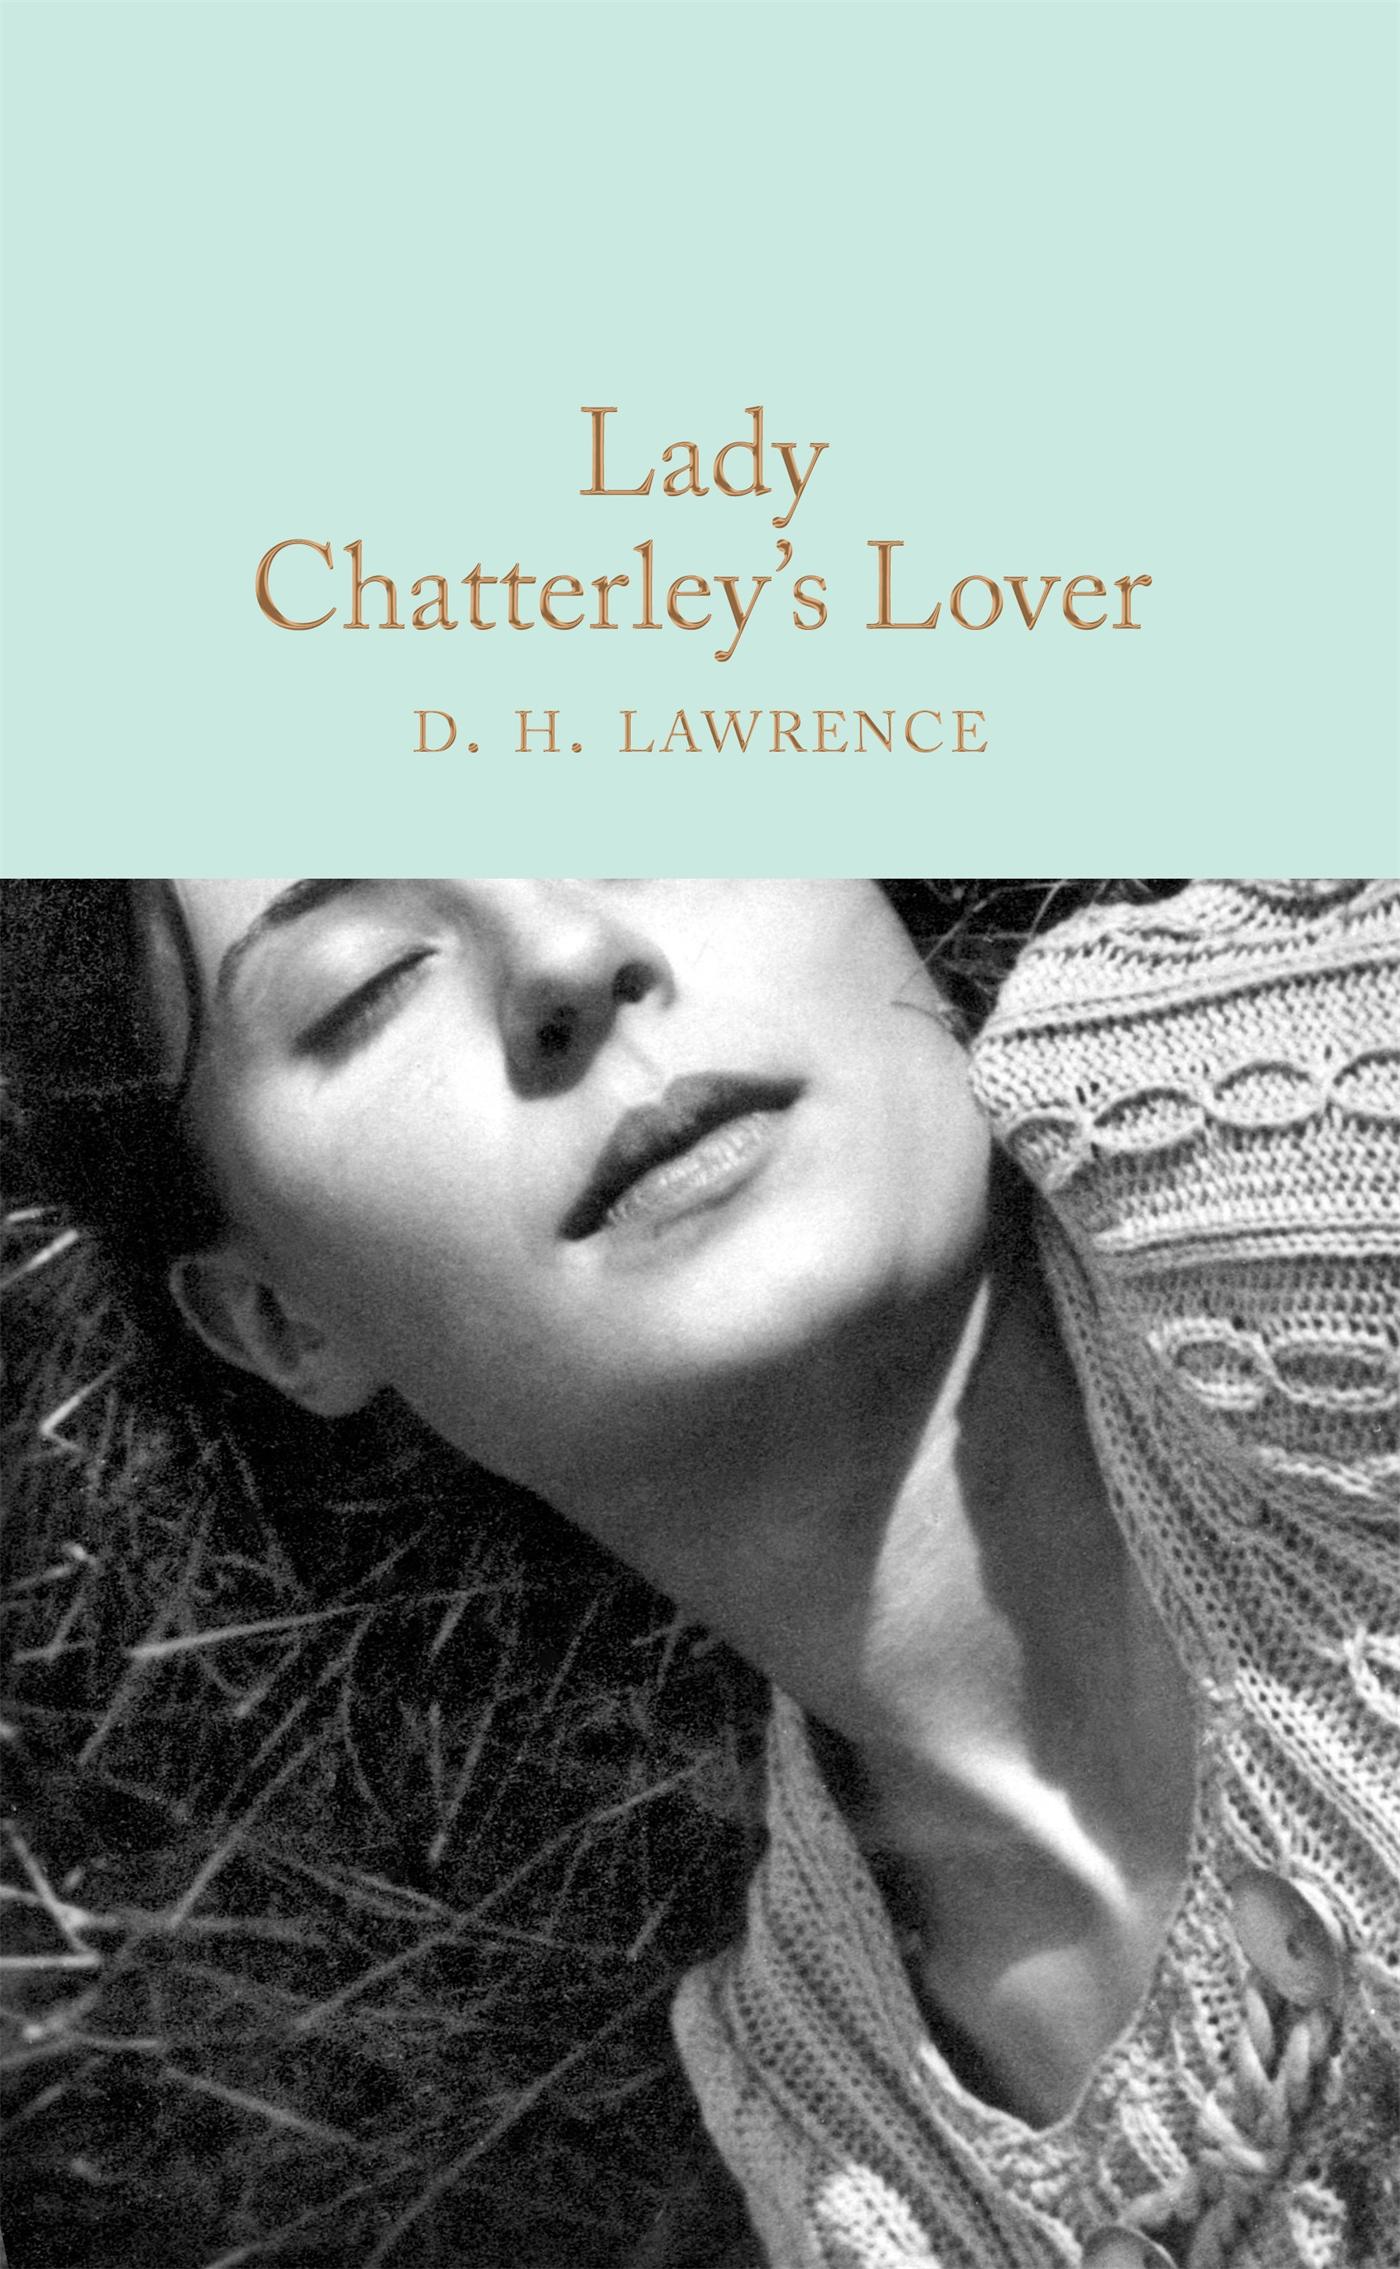 Lady Chatterley's Lover / D. H. Lawrence / Buch / 430 S. / Englisch / 2017 / Pan Macmillan / EAN 9781509843190 - Lawrence, D. H.